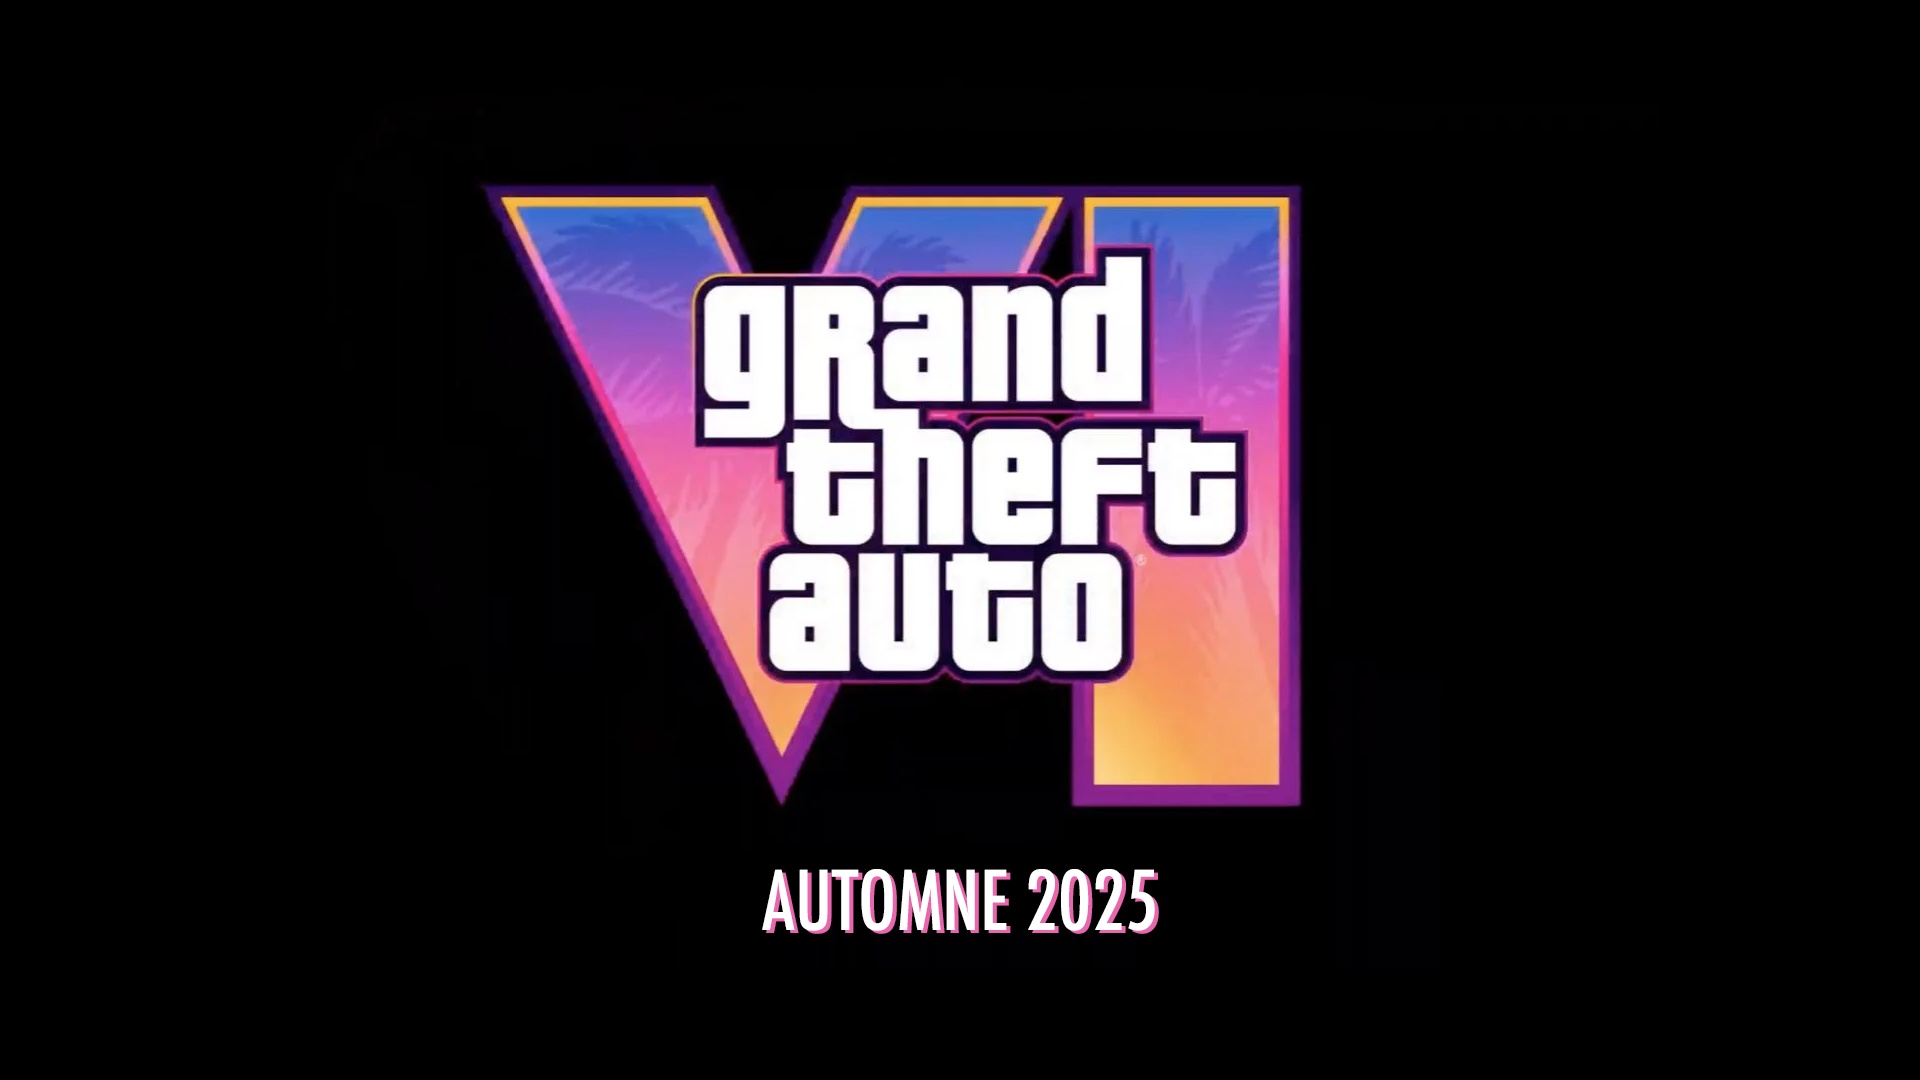 Officially: GTA 6 is expected to be released in fall 2025 on PS5 and Xbox Series